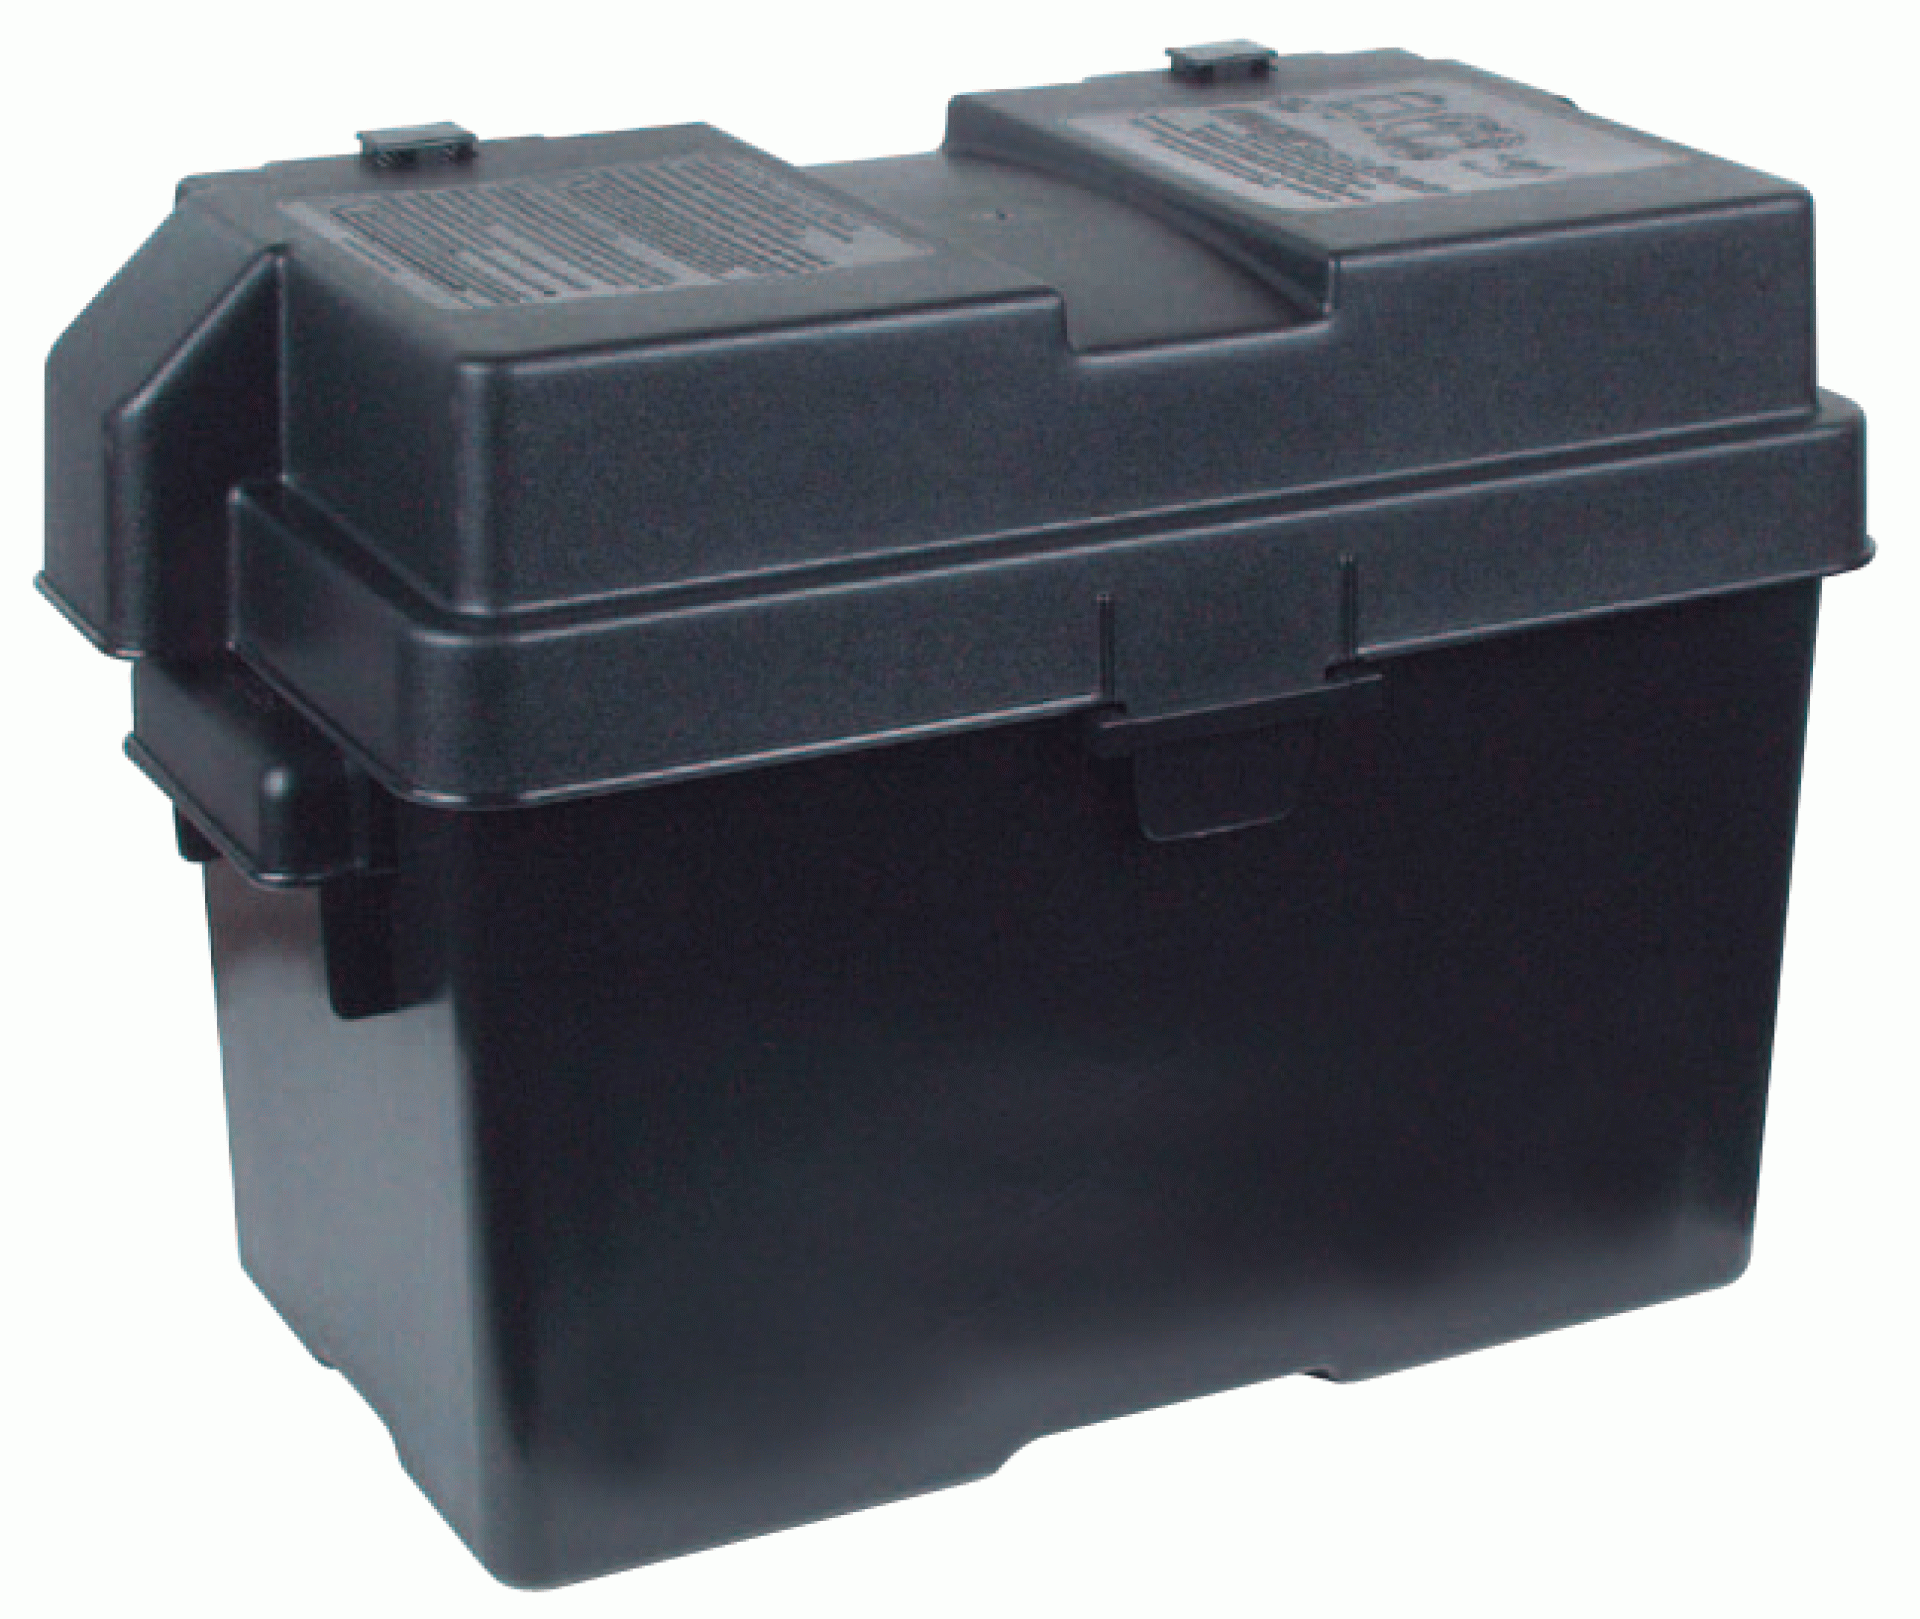 NOCO COMPANY | HM327BK | BATTERY BOX For GROUP 27 SNAP TOP